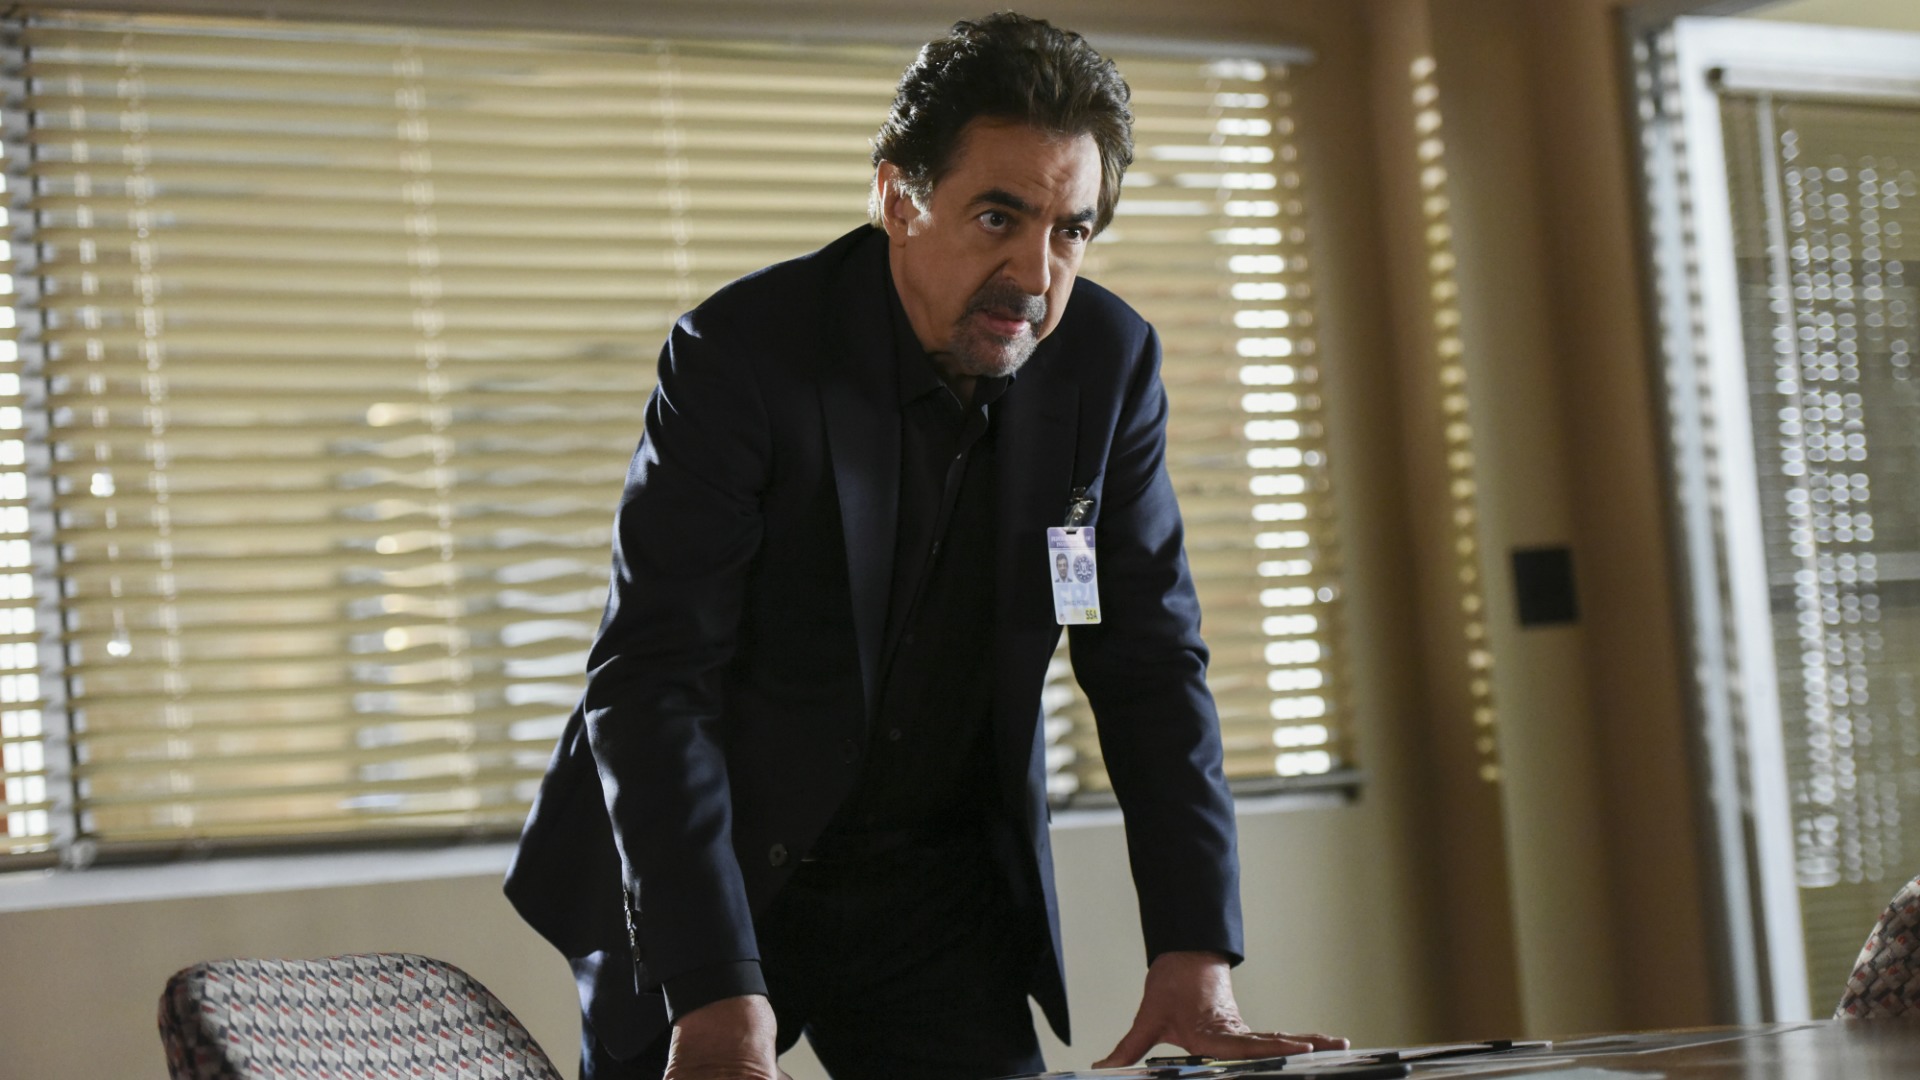 SSA David Rossi isn't pulling any punches.